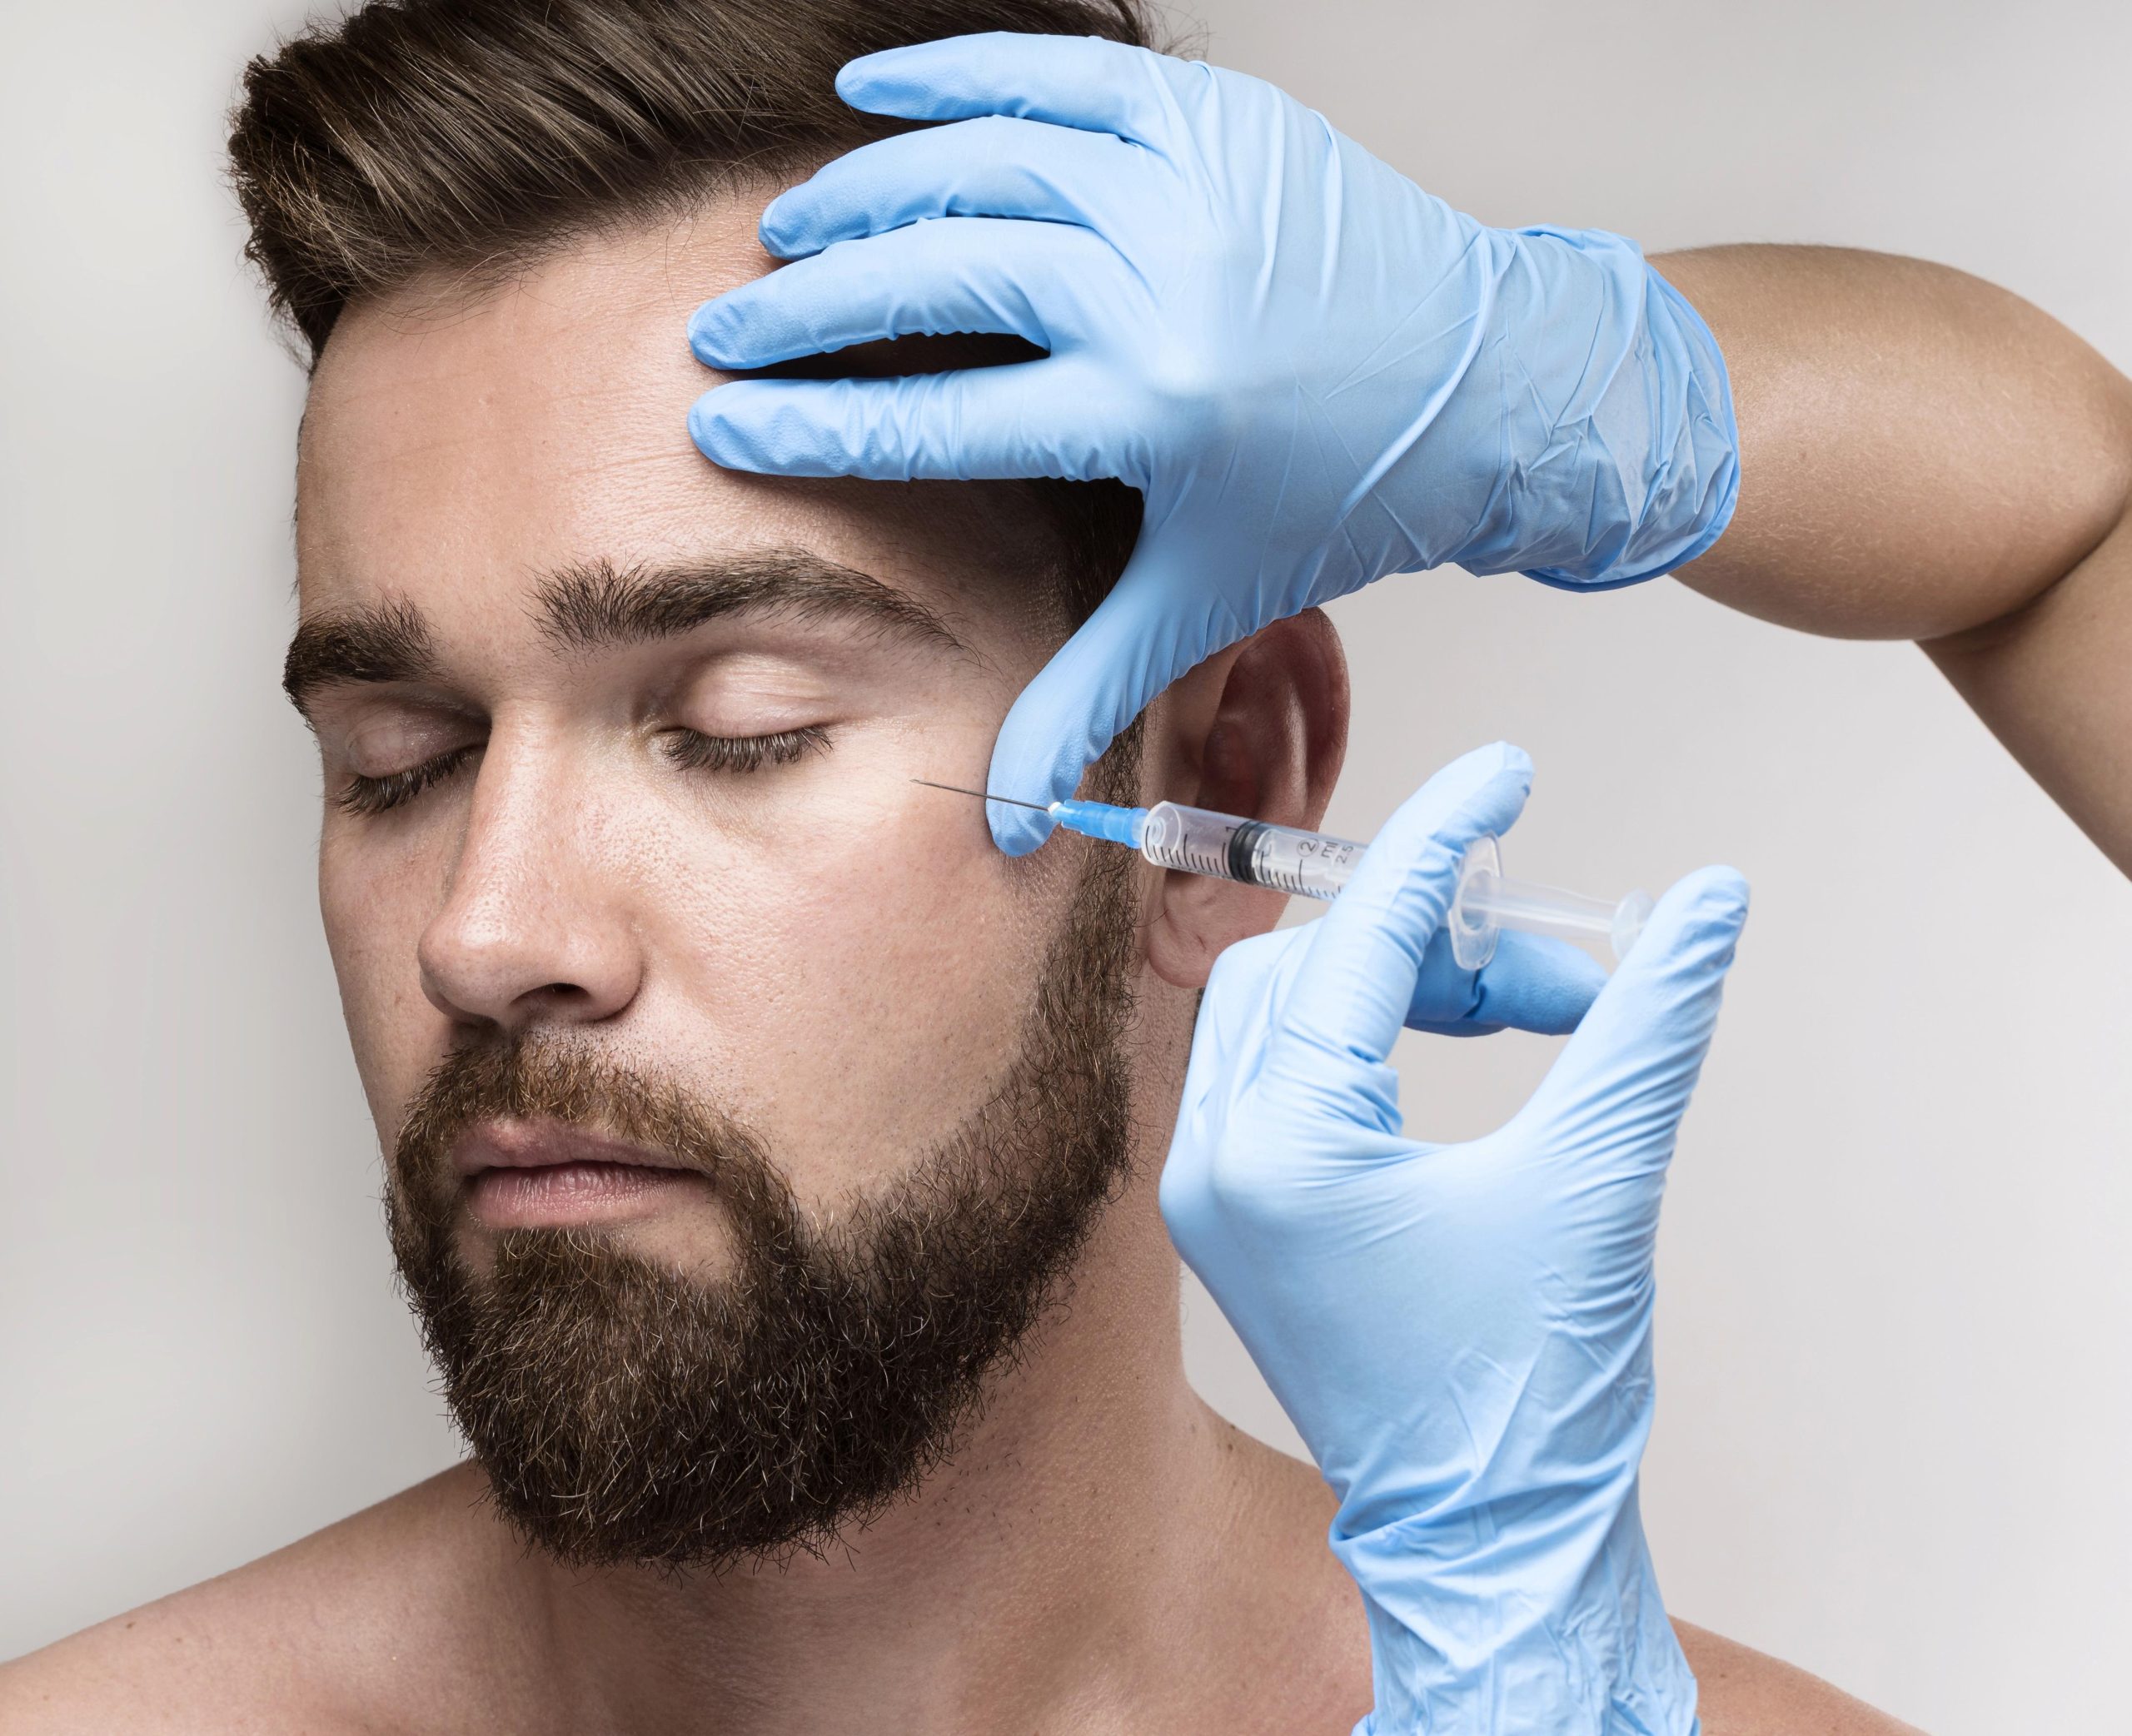 portrait-man-being-injected-his-face